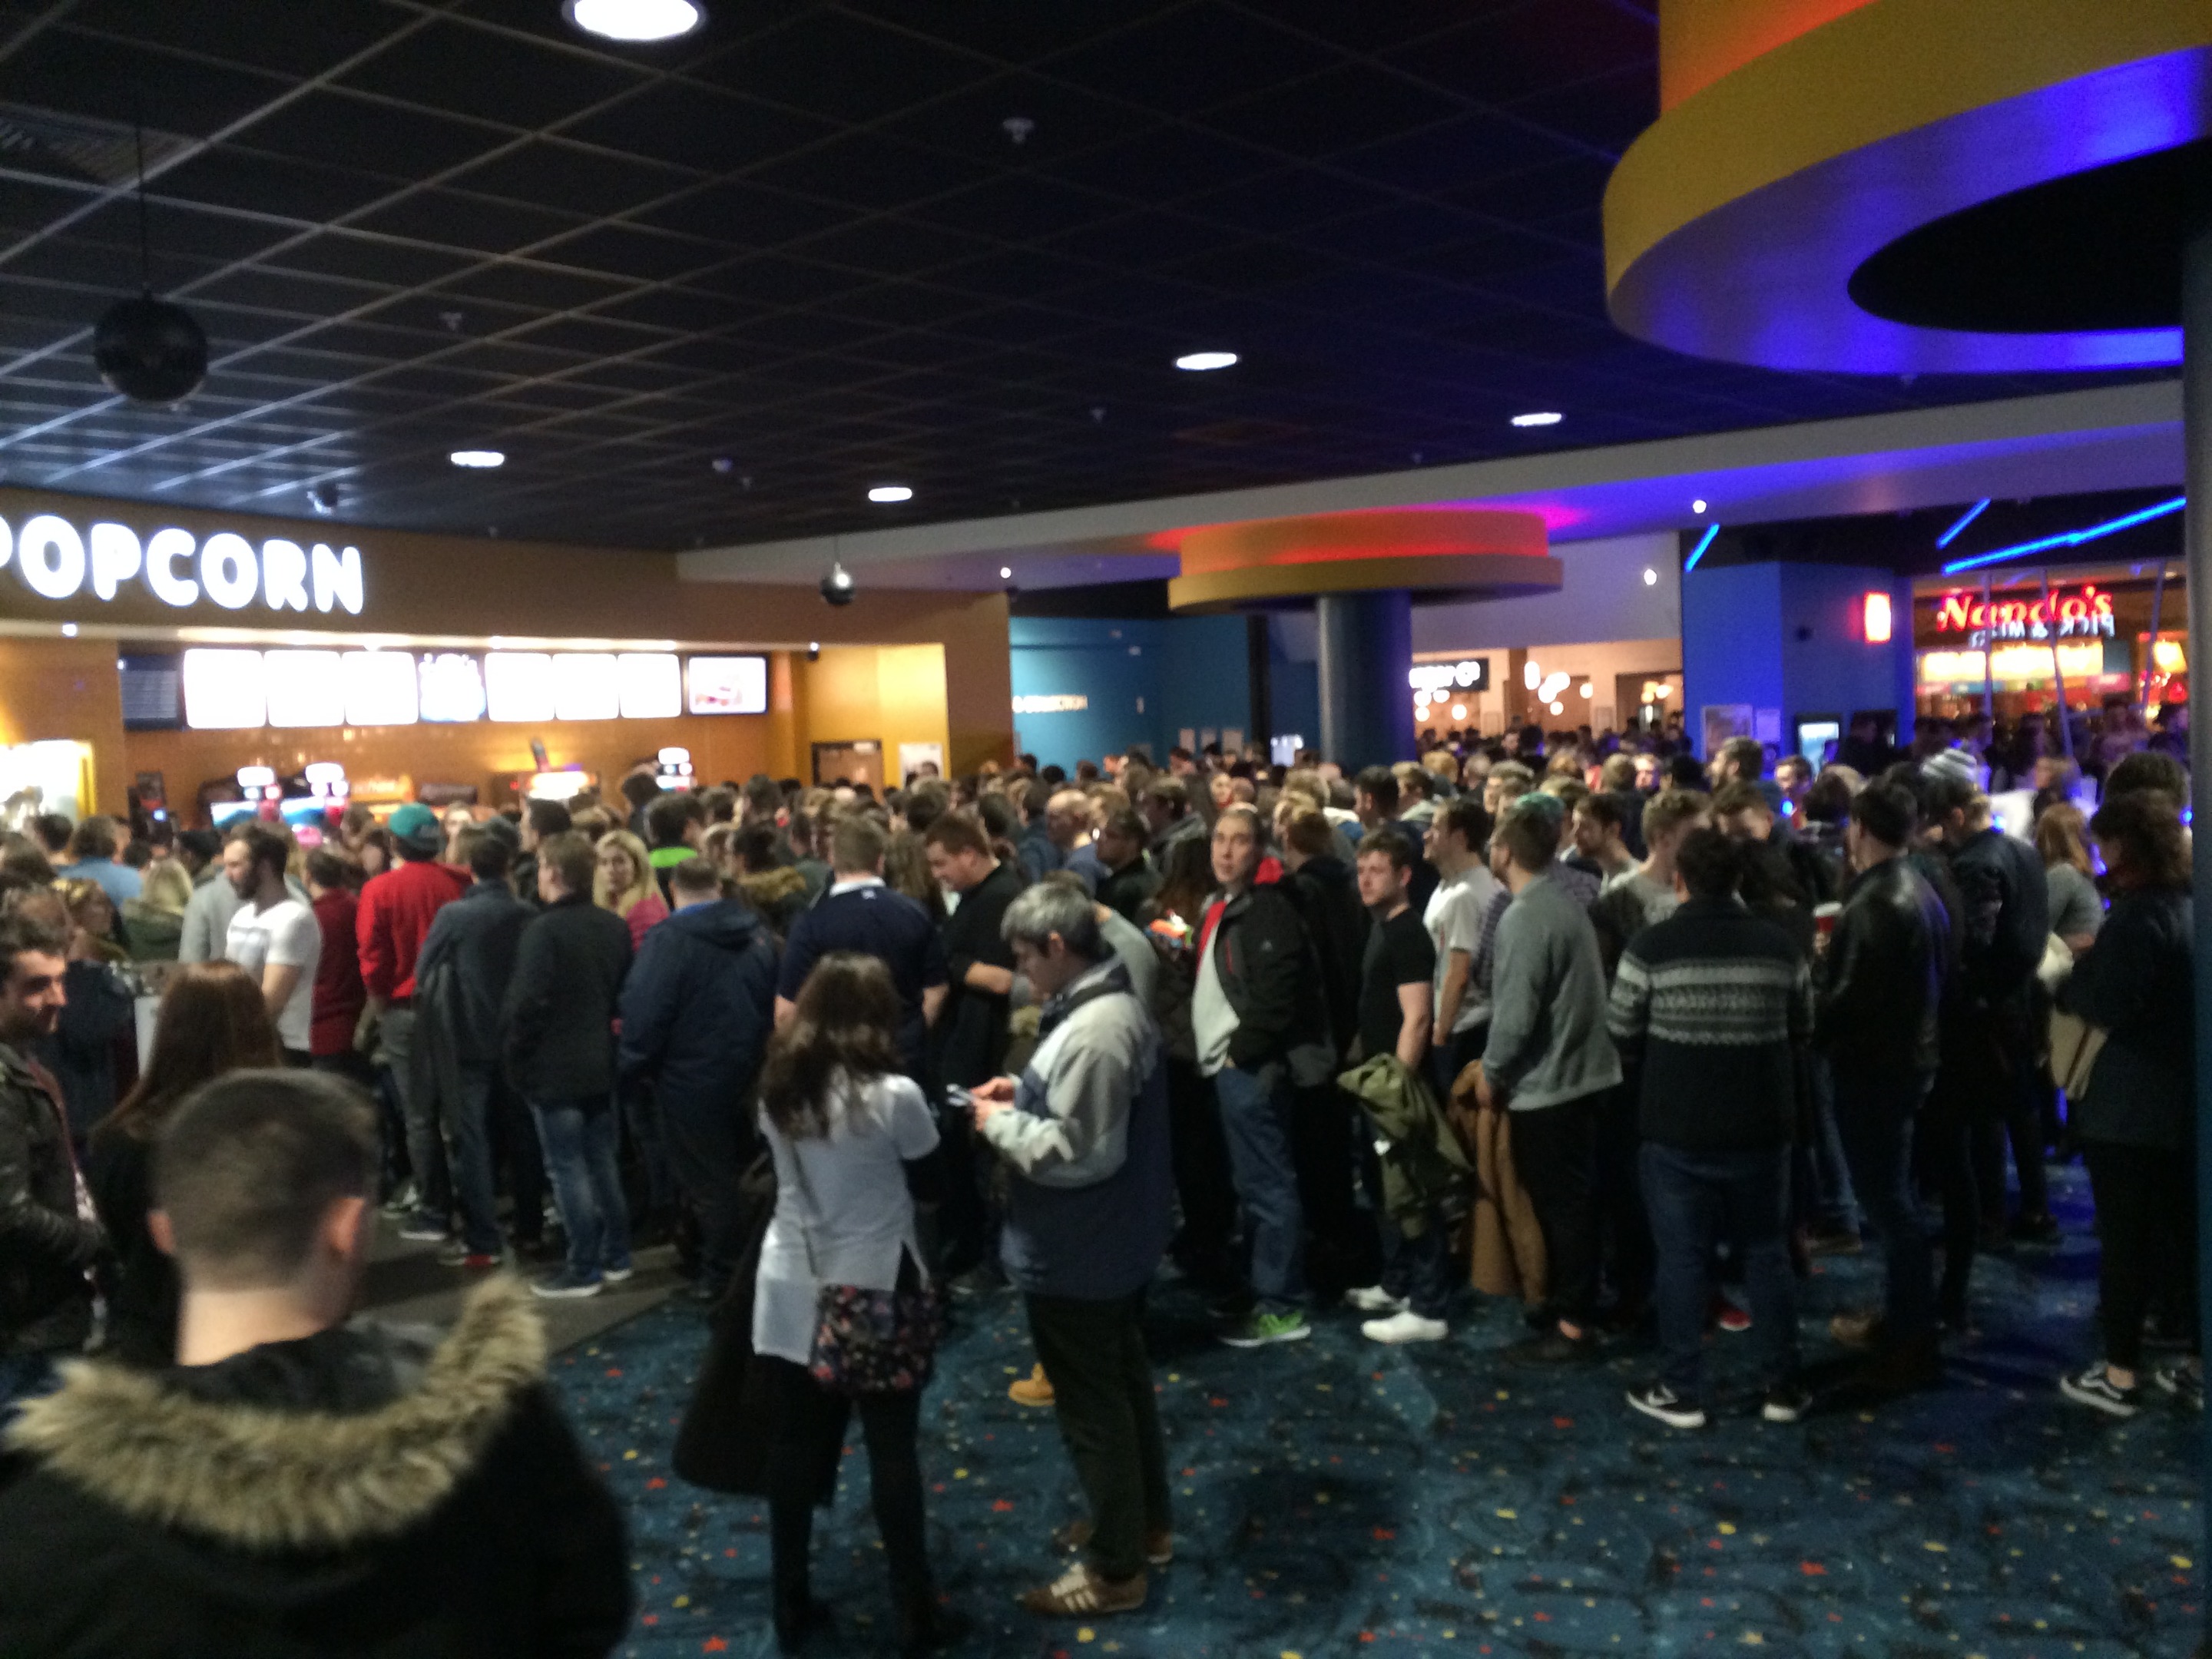 Fans queue out the door before the midnight screenings of Star Wars: The Force Awakens in Aberdeen's Union Square